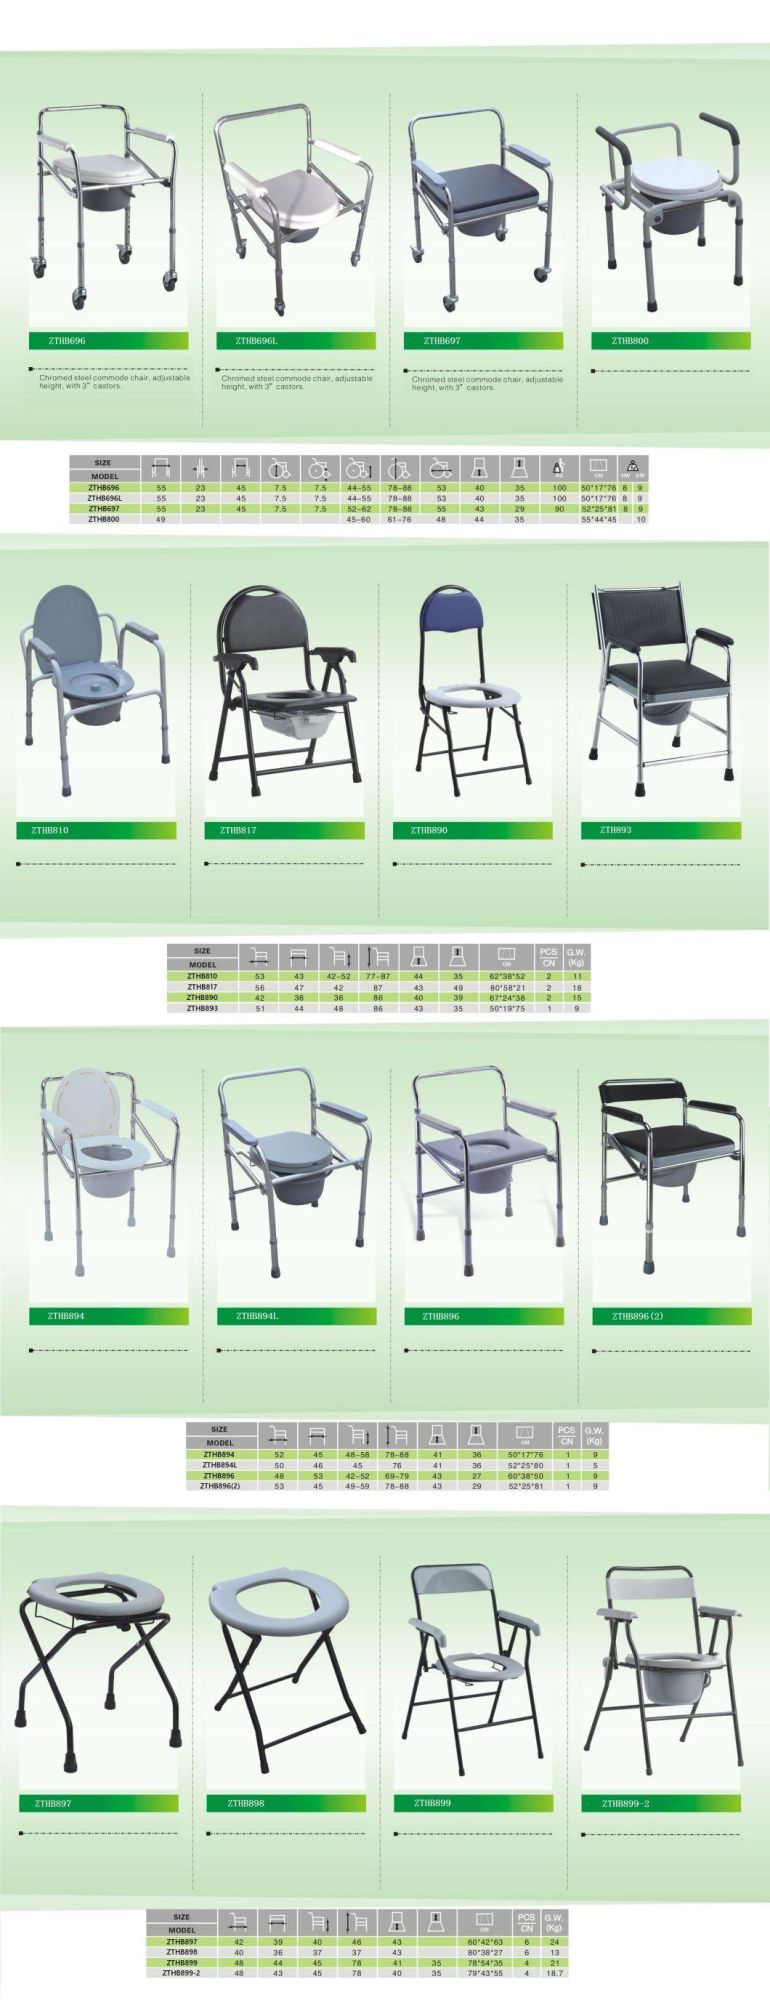 Easy Carry Outdoor Antiskid Folding Lightweight Commode Toilet Seat Elderly/Disable Patient People Rehabilitation Care Products Steel Nursing Chair in Bathroom